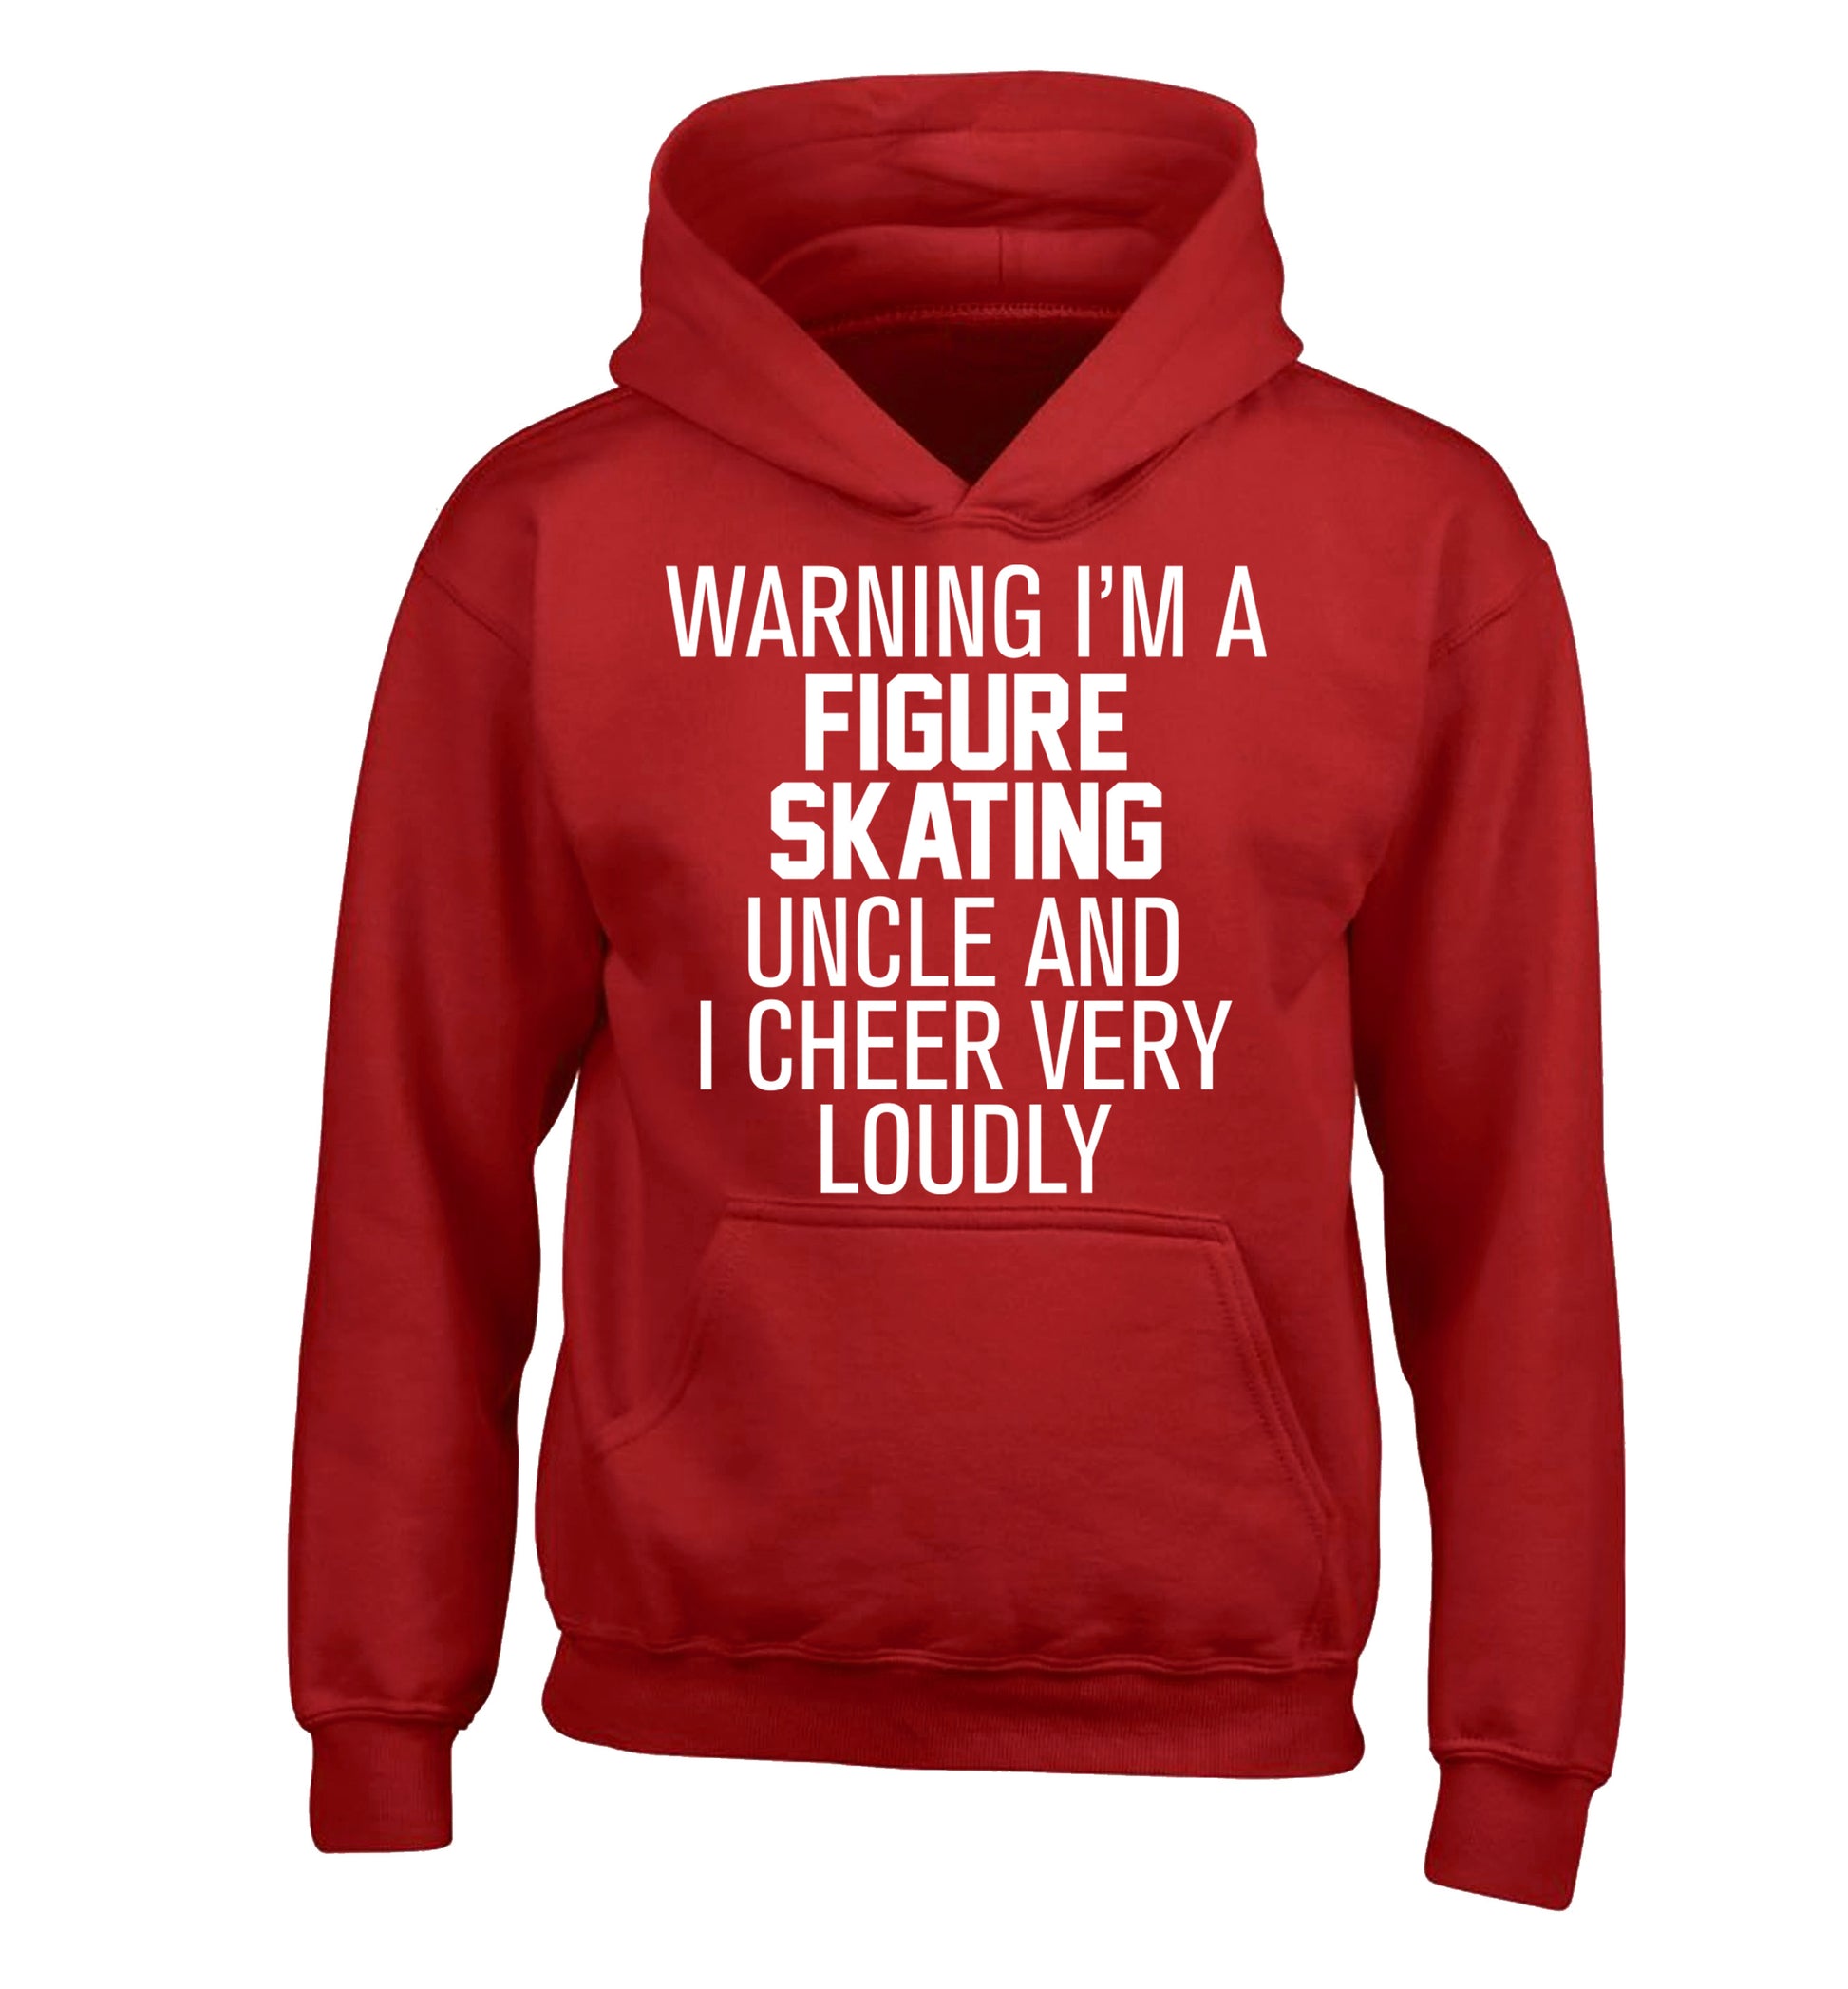 Warning I'm a figure skating uncle and I cheer very loudly children's red hoodie 12-14 Years